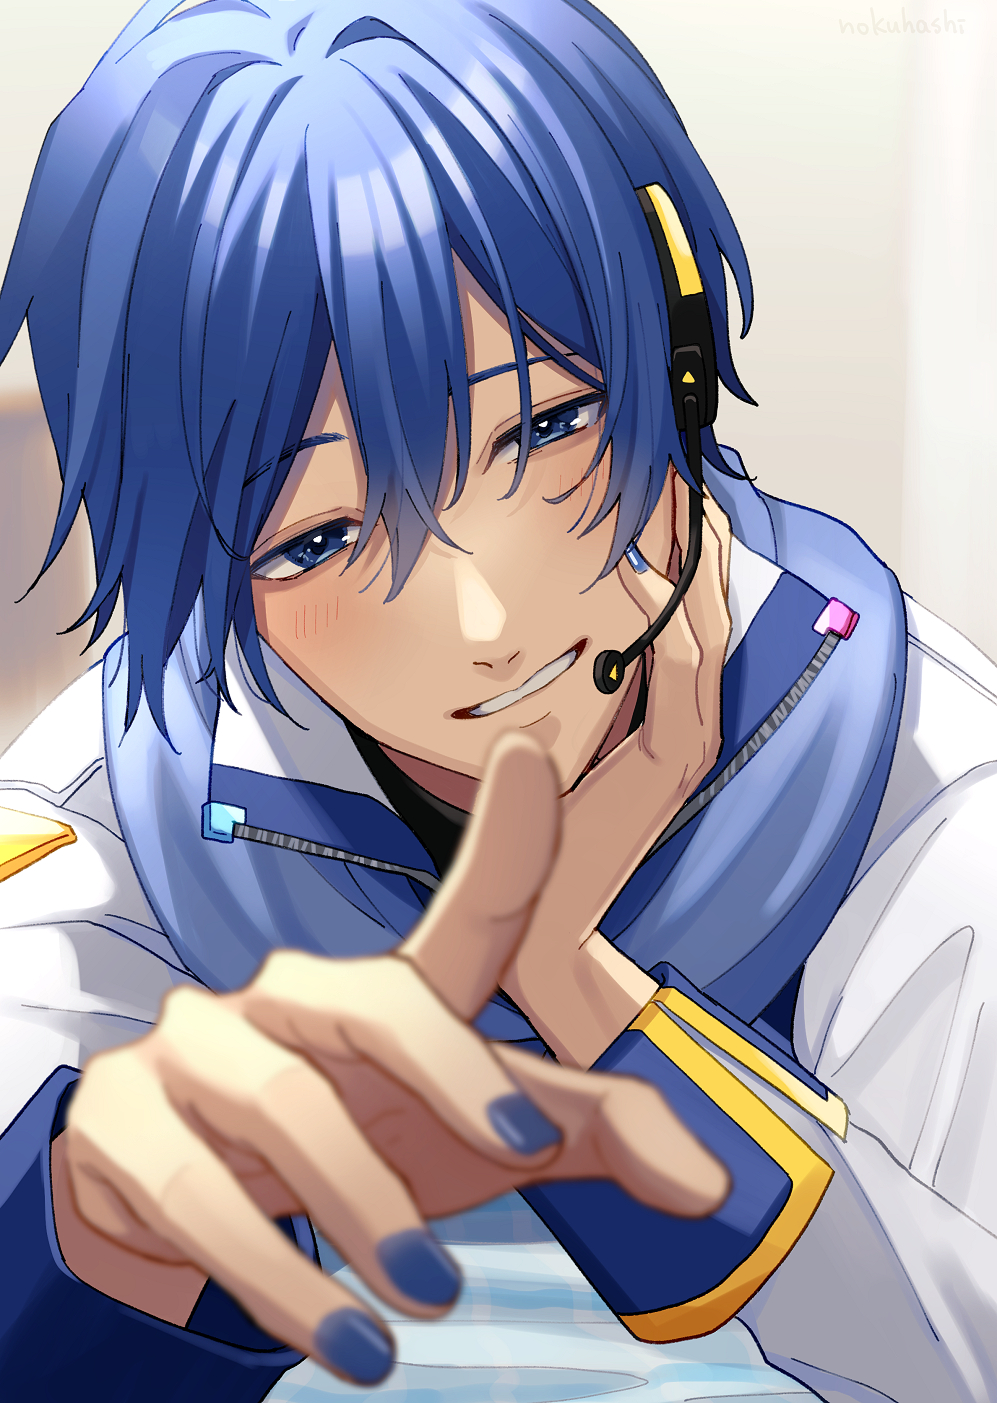 1boy bangs blue_eyes blue_hair blue_nails blush hair_between_eyes highres kaito_(vocaloid) kaito_(vocaloid3) long_sleeves looking_at_viewer male_focus nokuhashi open_mouth pointing pointing_at_viewer sleeve_cuffs vocaloid